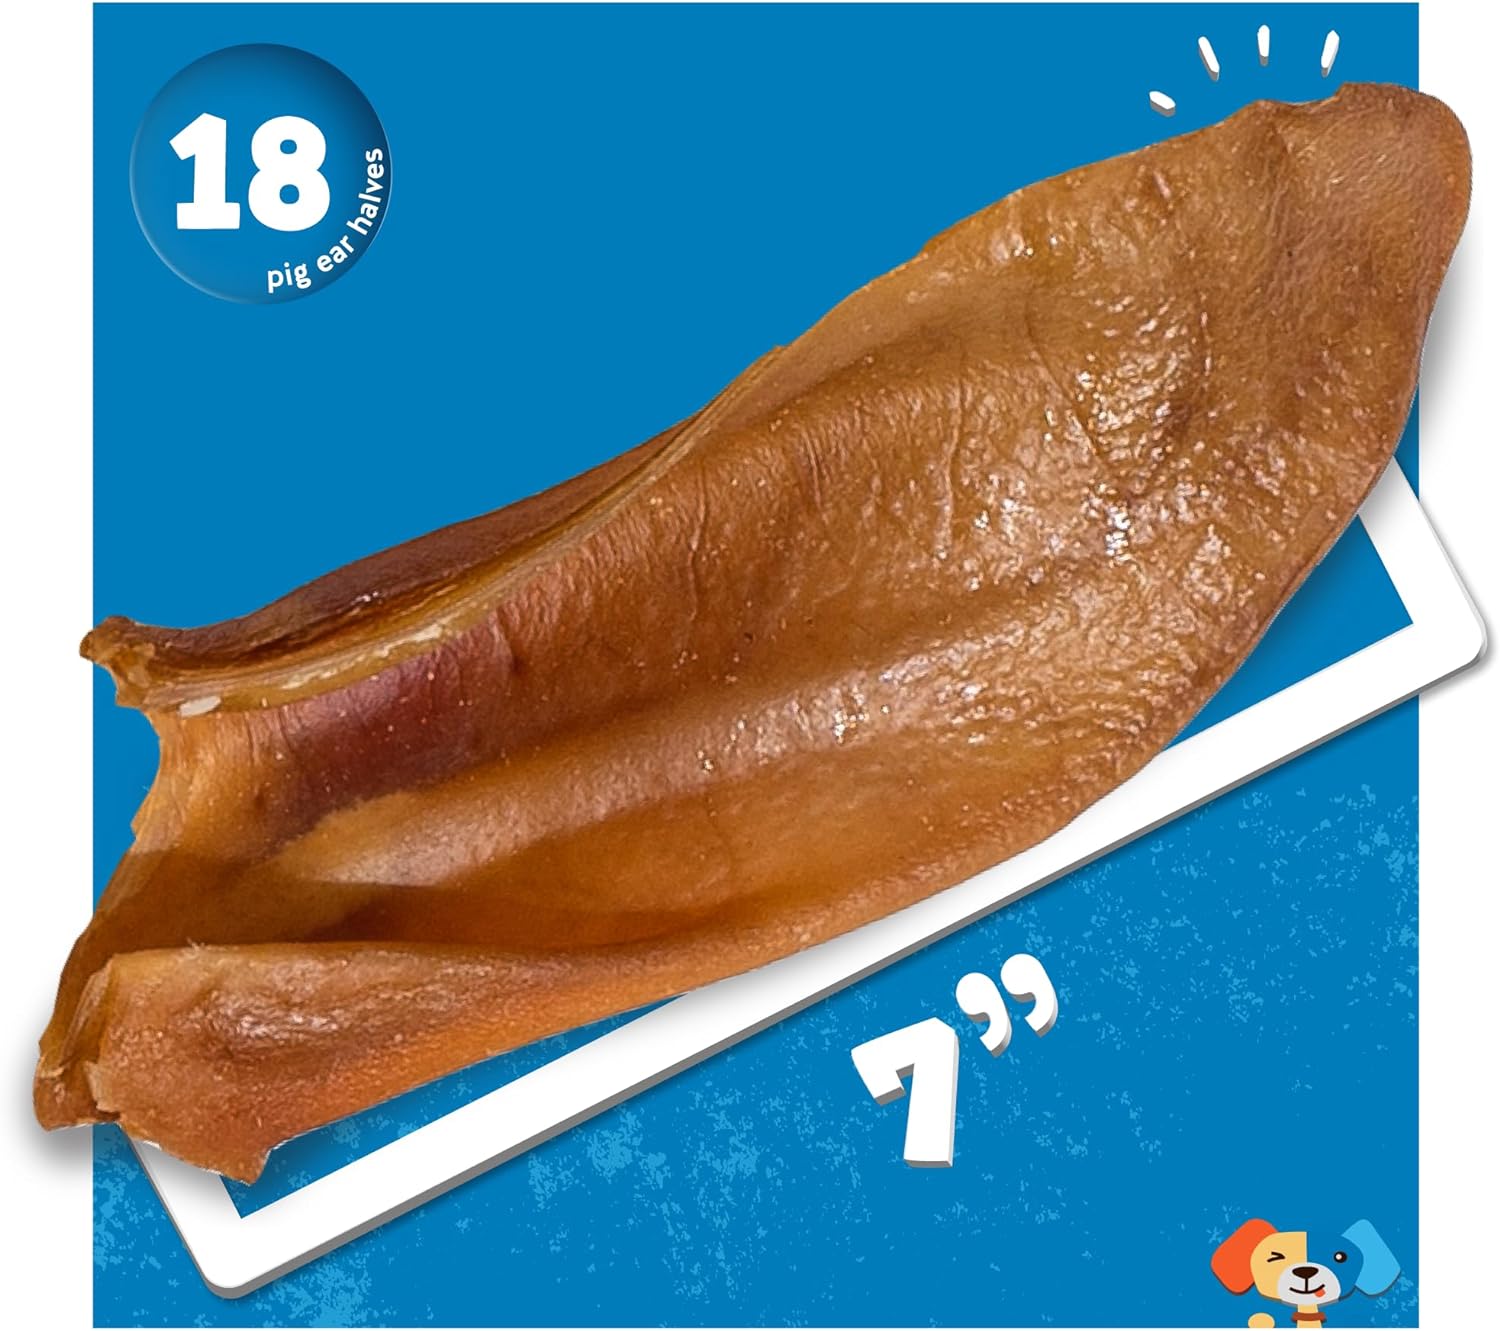 Jack&Pup Pig Ears for Dogs (18 Pack) Extra Thick Half Pigs Ears - Premium Dog Pig Ear Treats - Healthy Dog Pork Chews; Excellent Rawhide Alternative : Pet Supplies